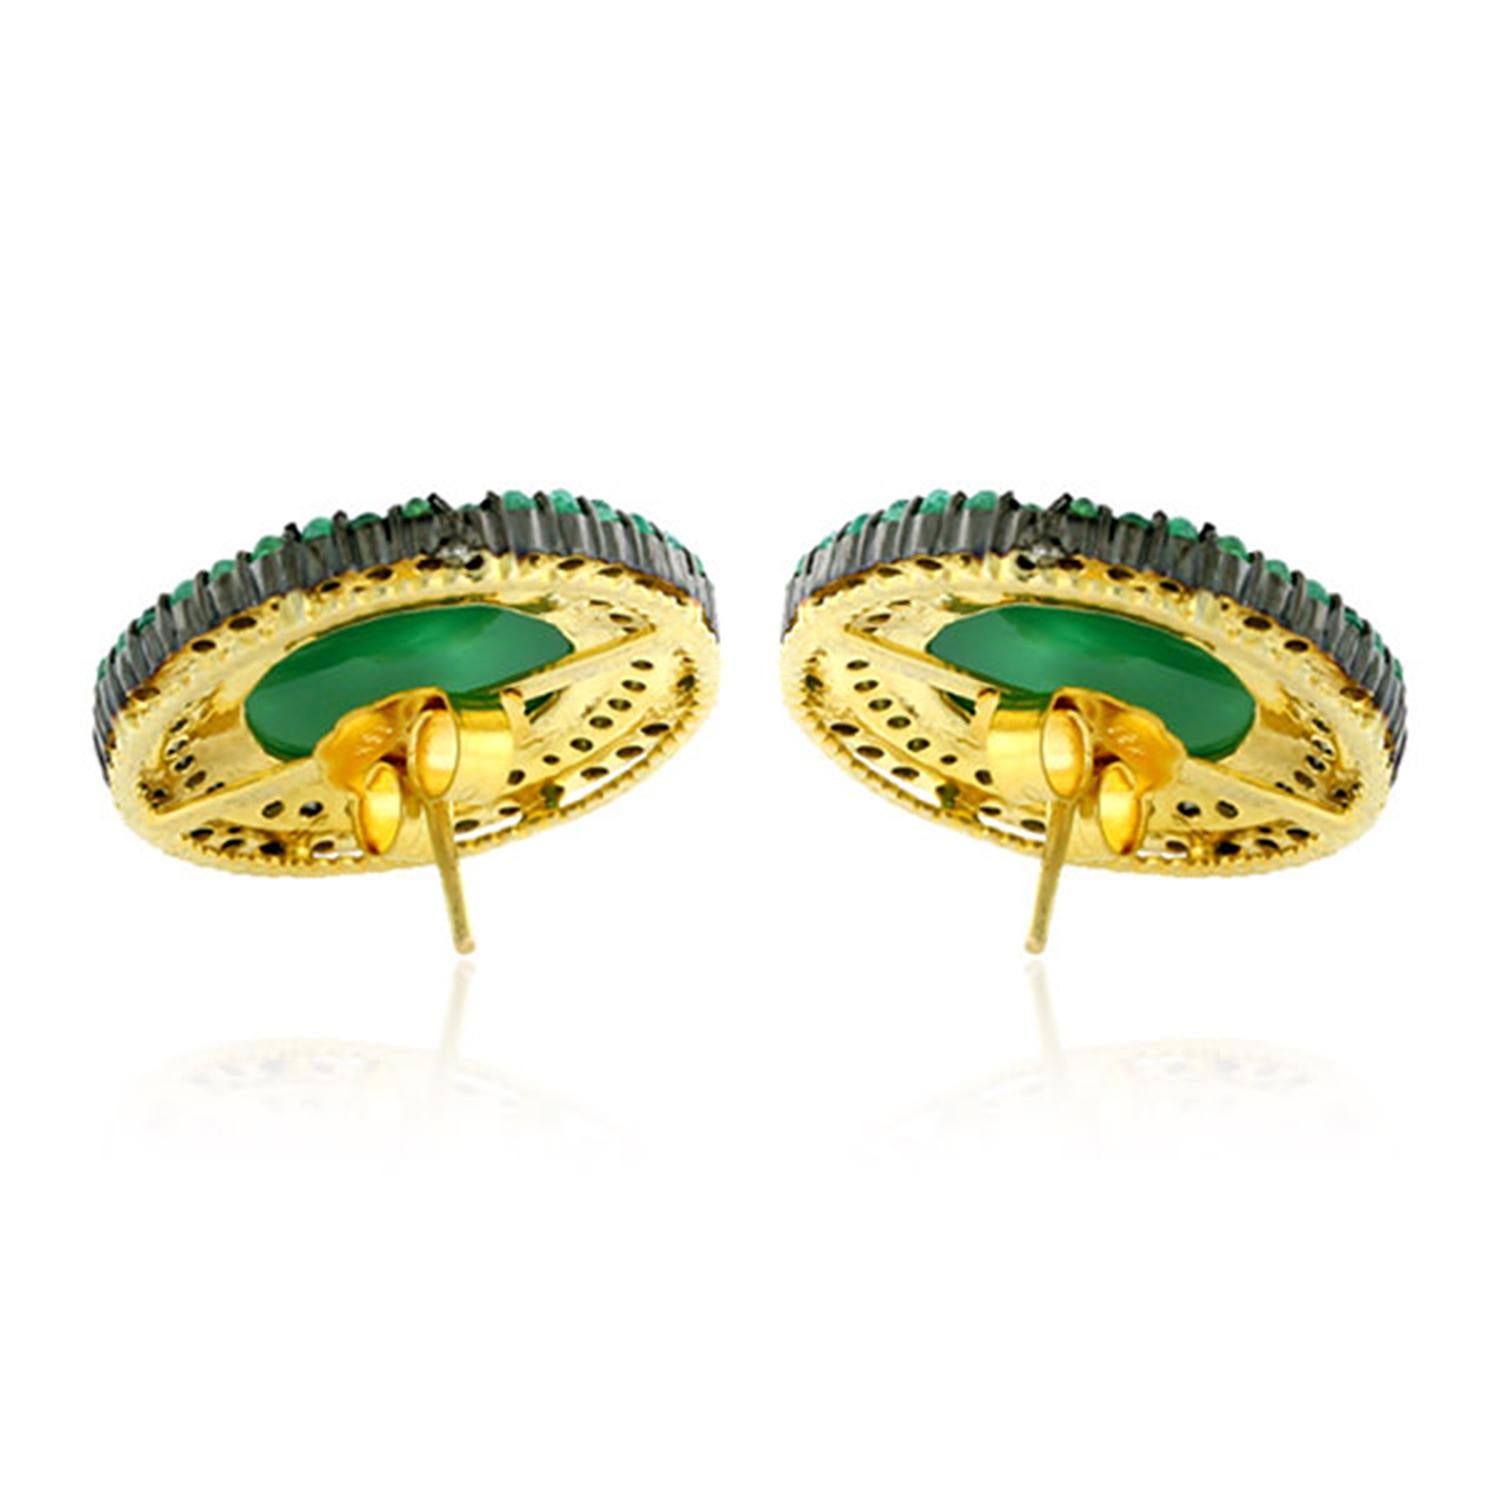 Cast in 18 karat gold & sterling silver. These beautiful cameo stud earrings are set with 14.2 carats cameo, 2.1 carats emerald and .98 carats of sparkling diamonds. 

FOLLOW  MEGHNA JEWELS storefront to view the latest collection & exclusive